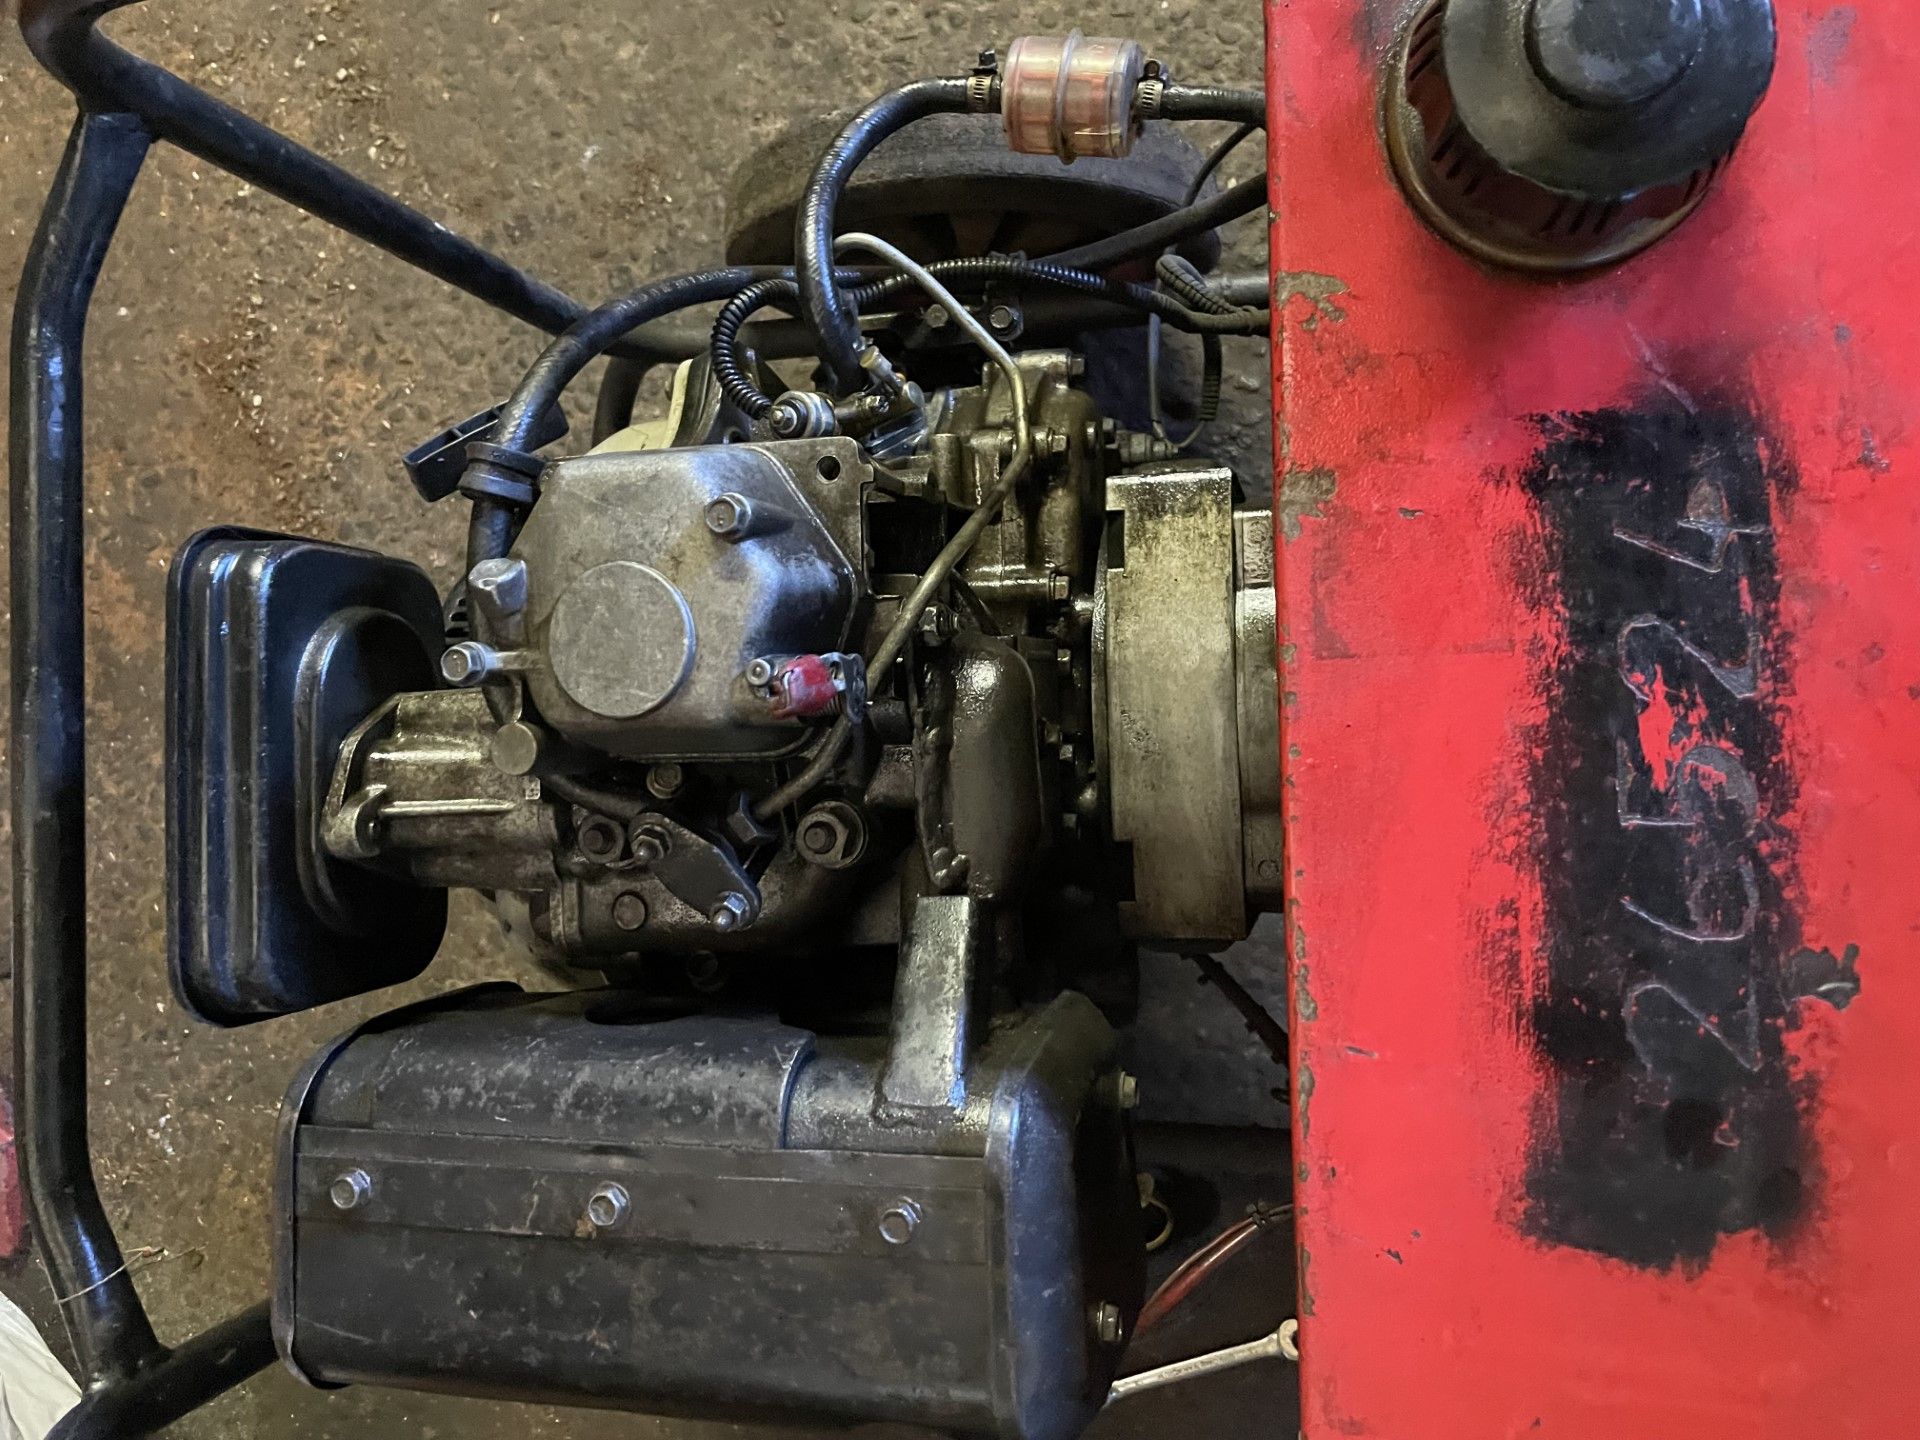 Generator with yanmar engine The engine sounds rough when you turn it over So could be a new - Image 6 of 7